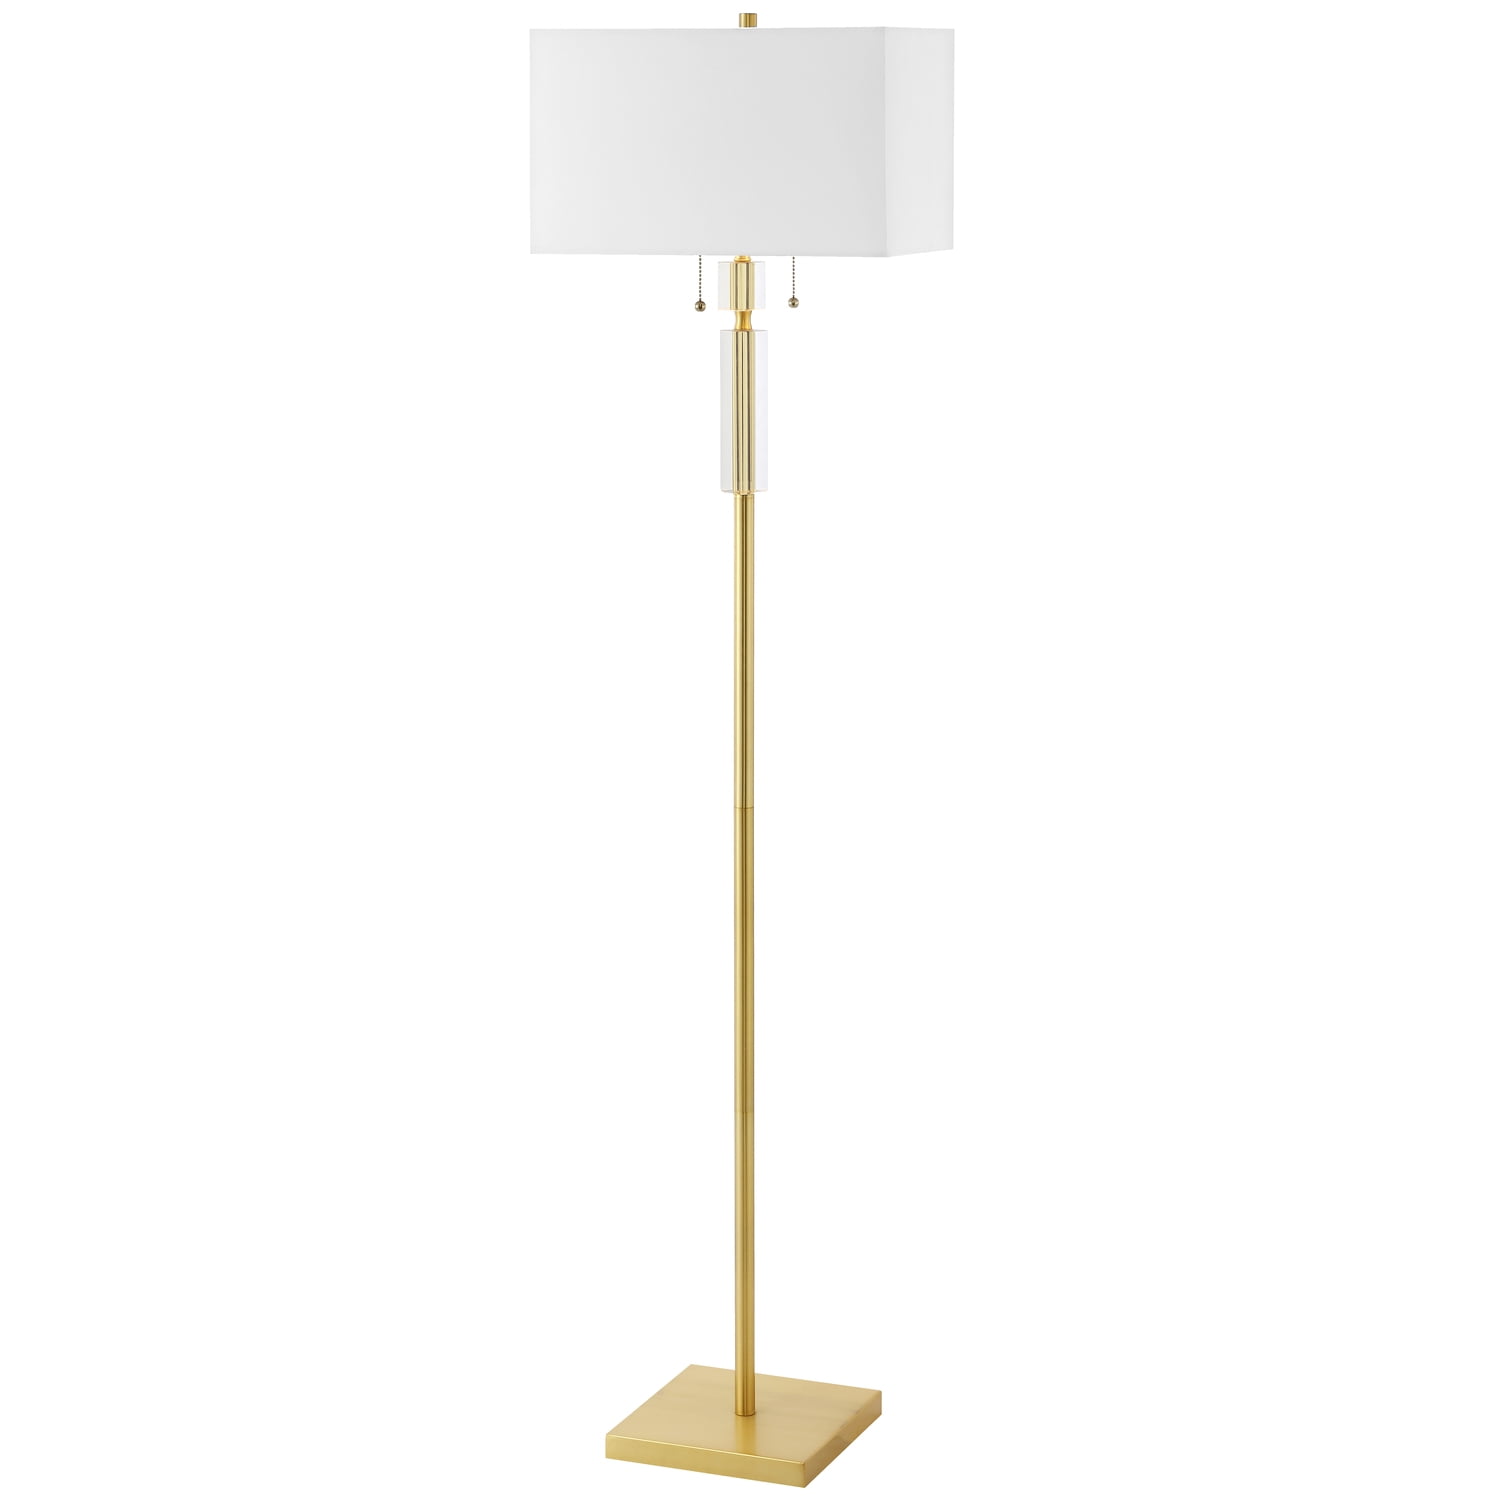 Picture of Dainolite DM231F-AGB 2 Light Incandescent Floor Lamp, Aged Brass with White Shade